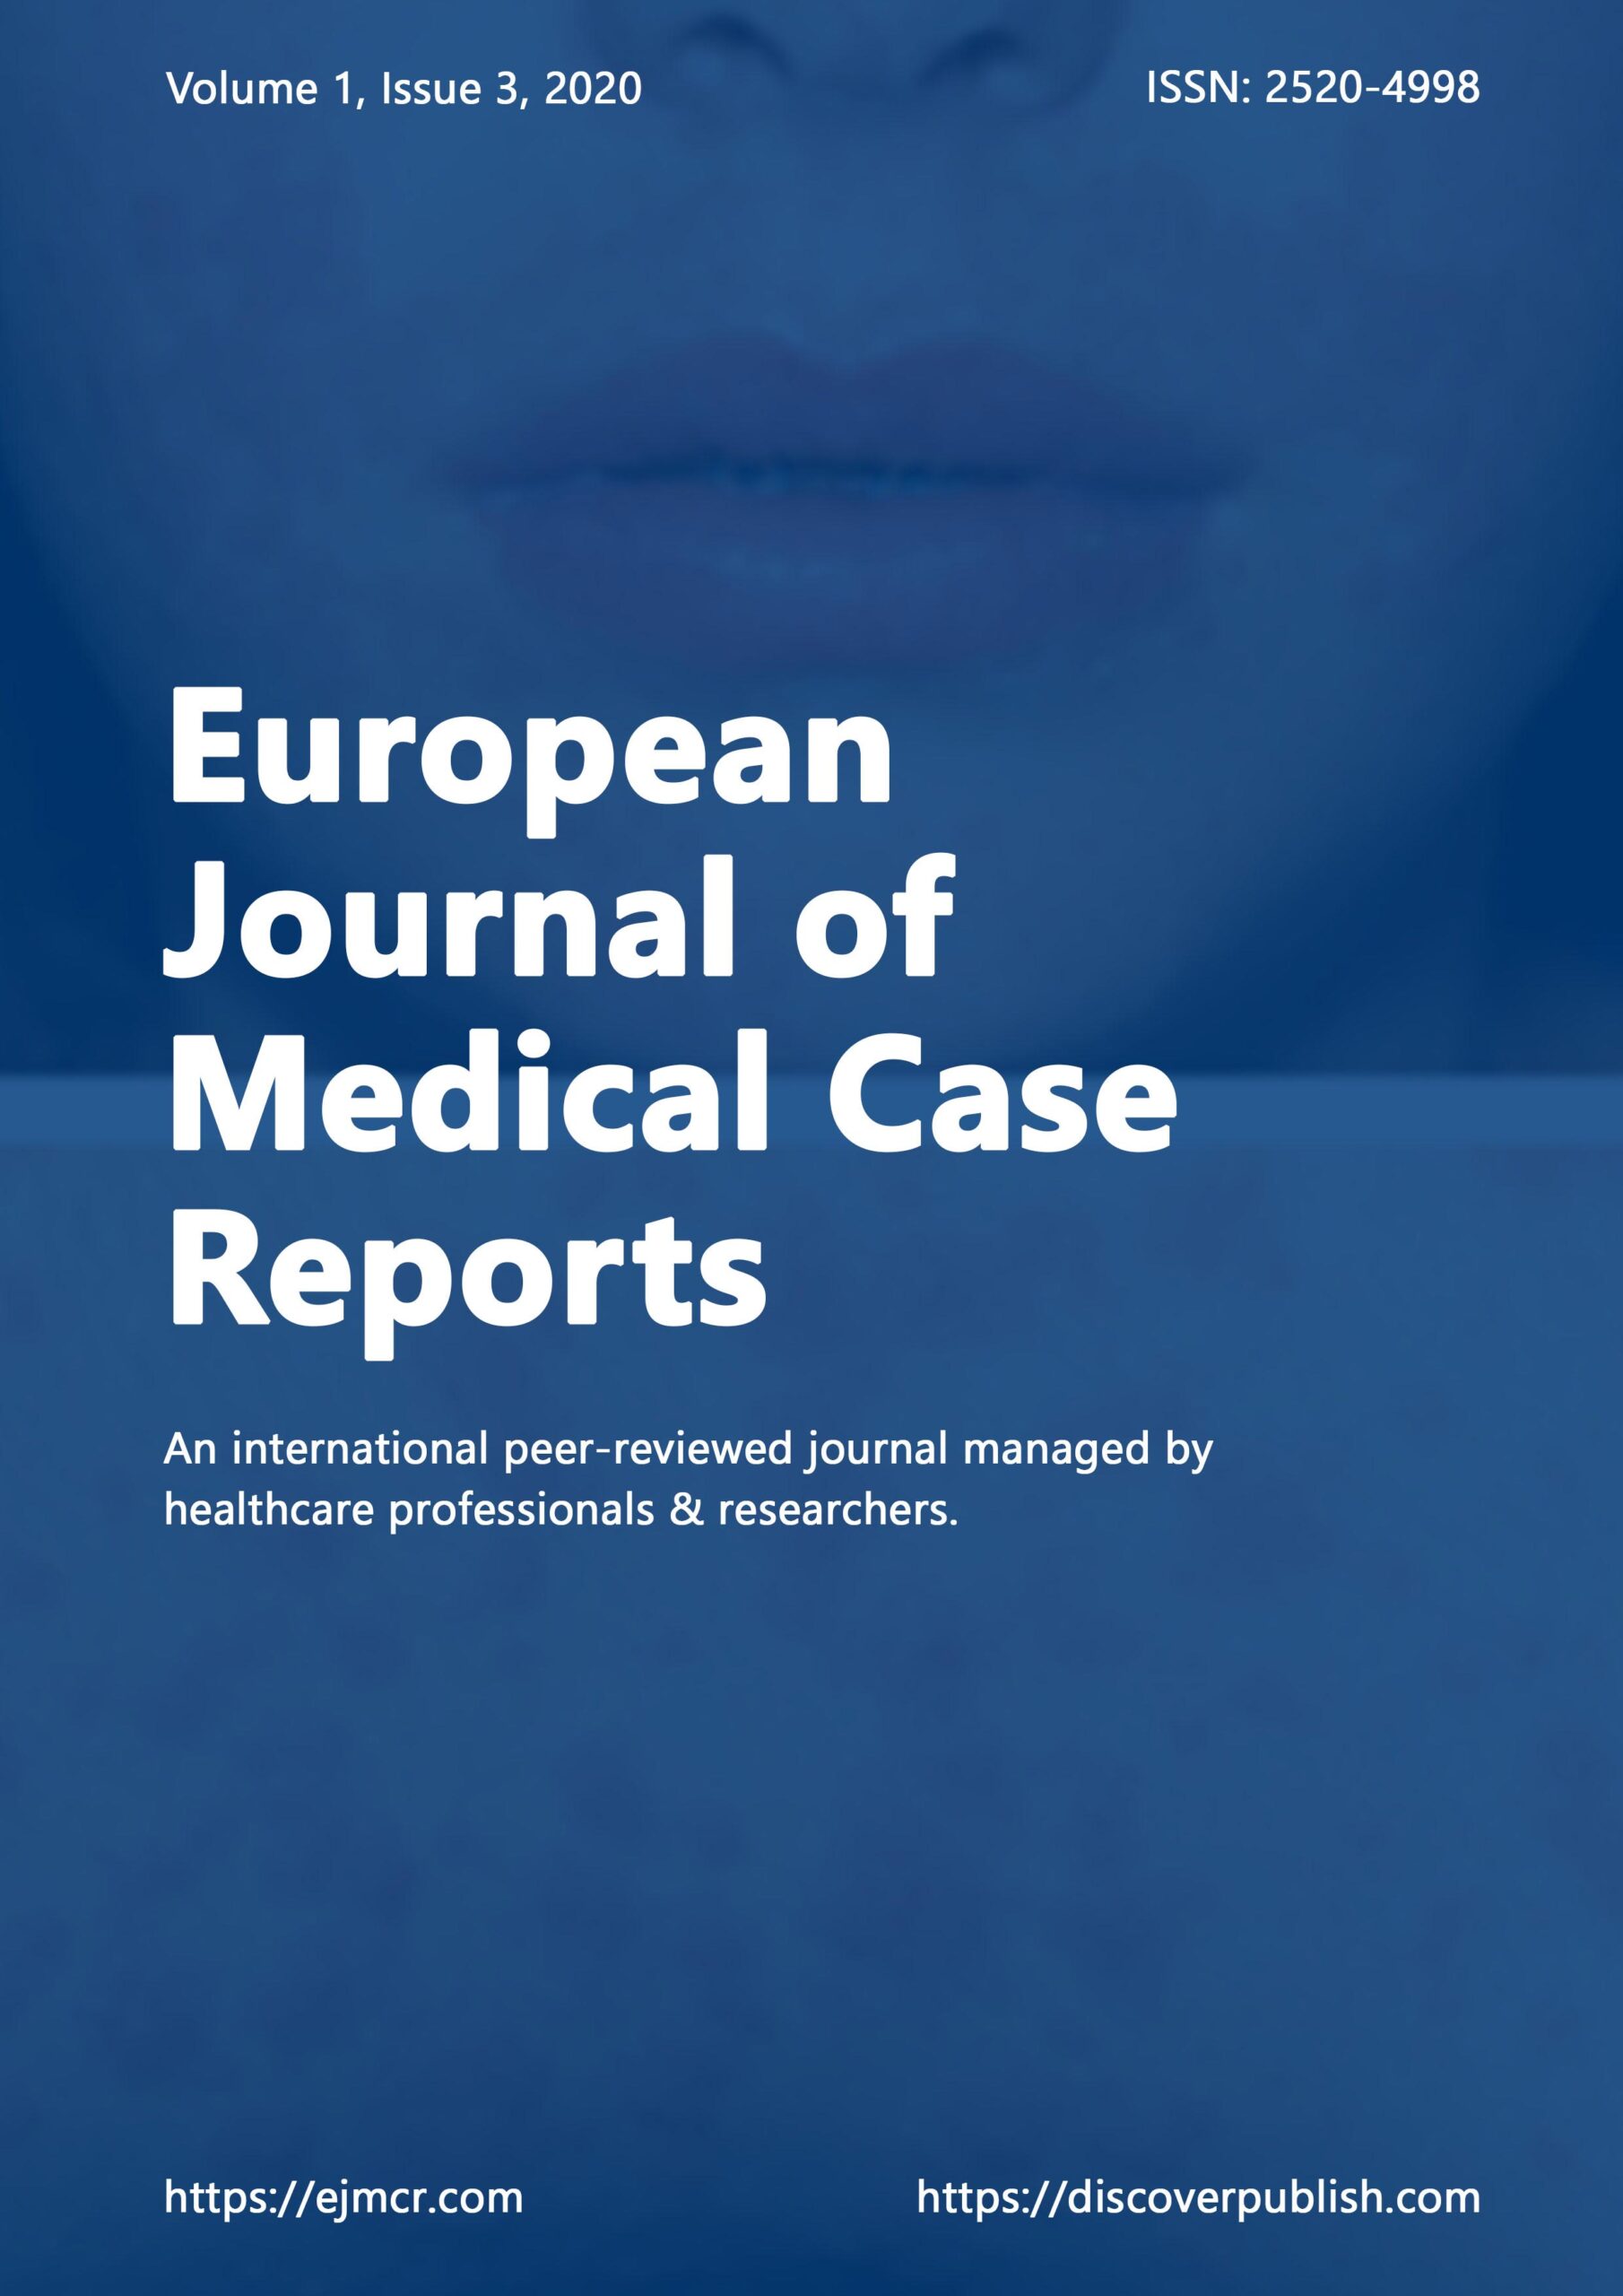 European Journal of Medical Case Reports